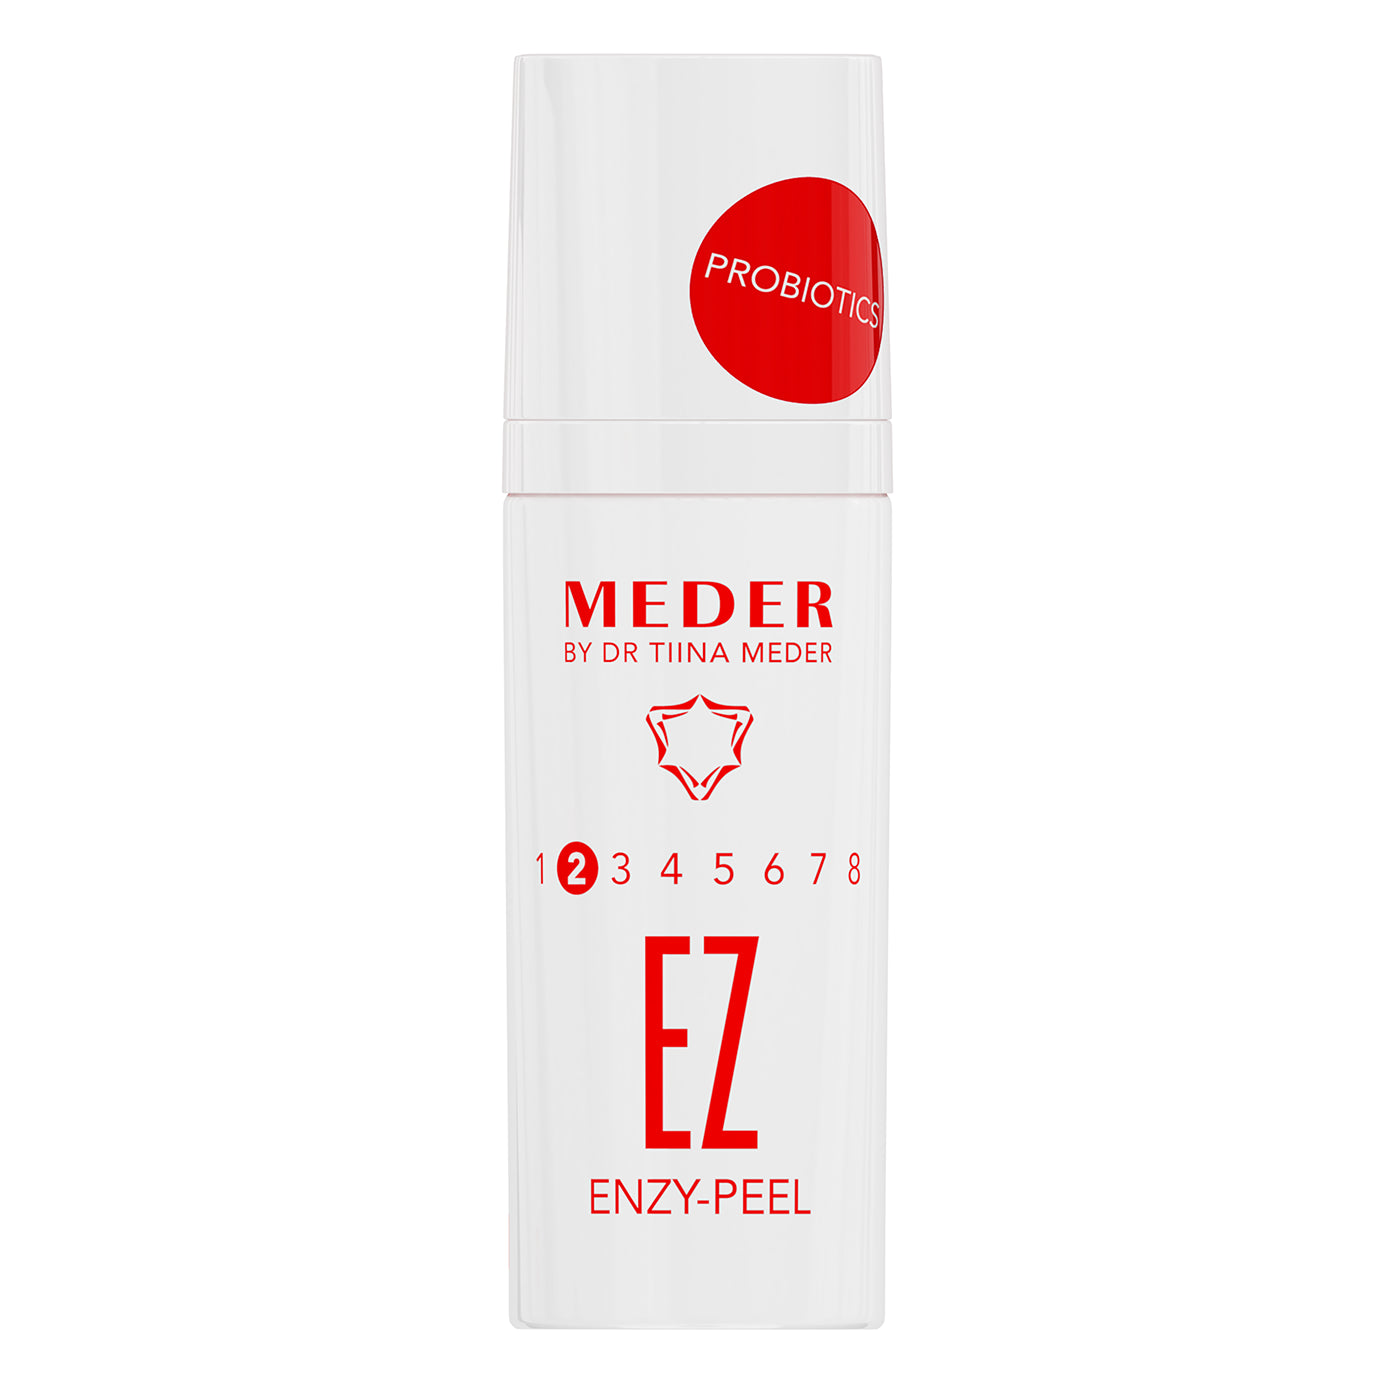 Enzy-Peel Double-action Exfoliating Mask